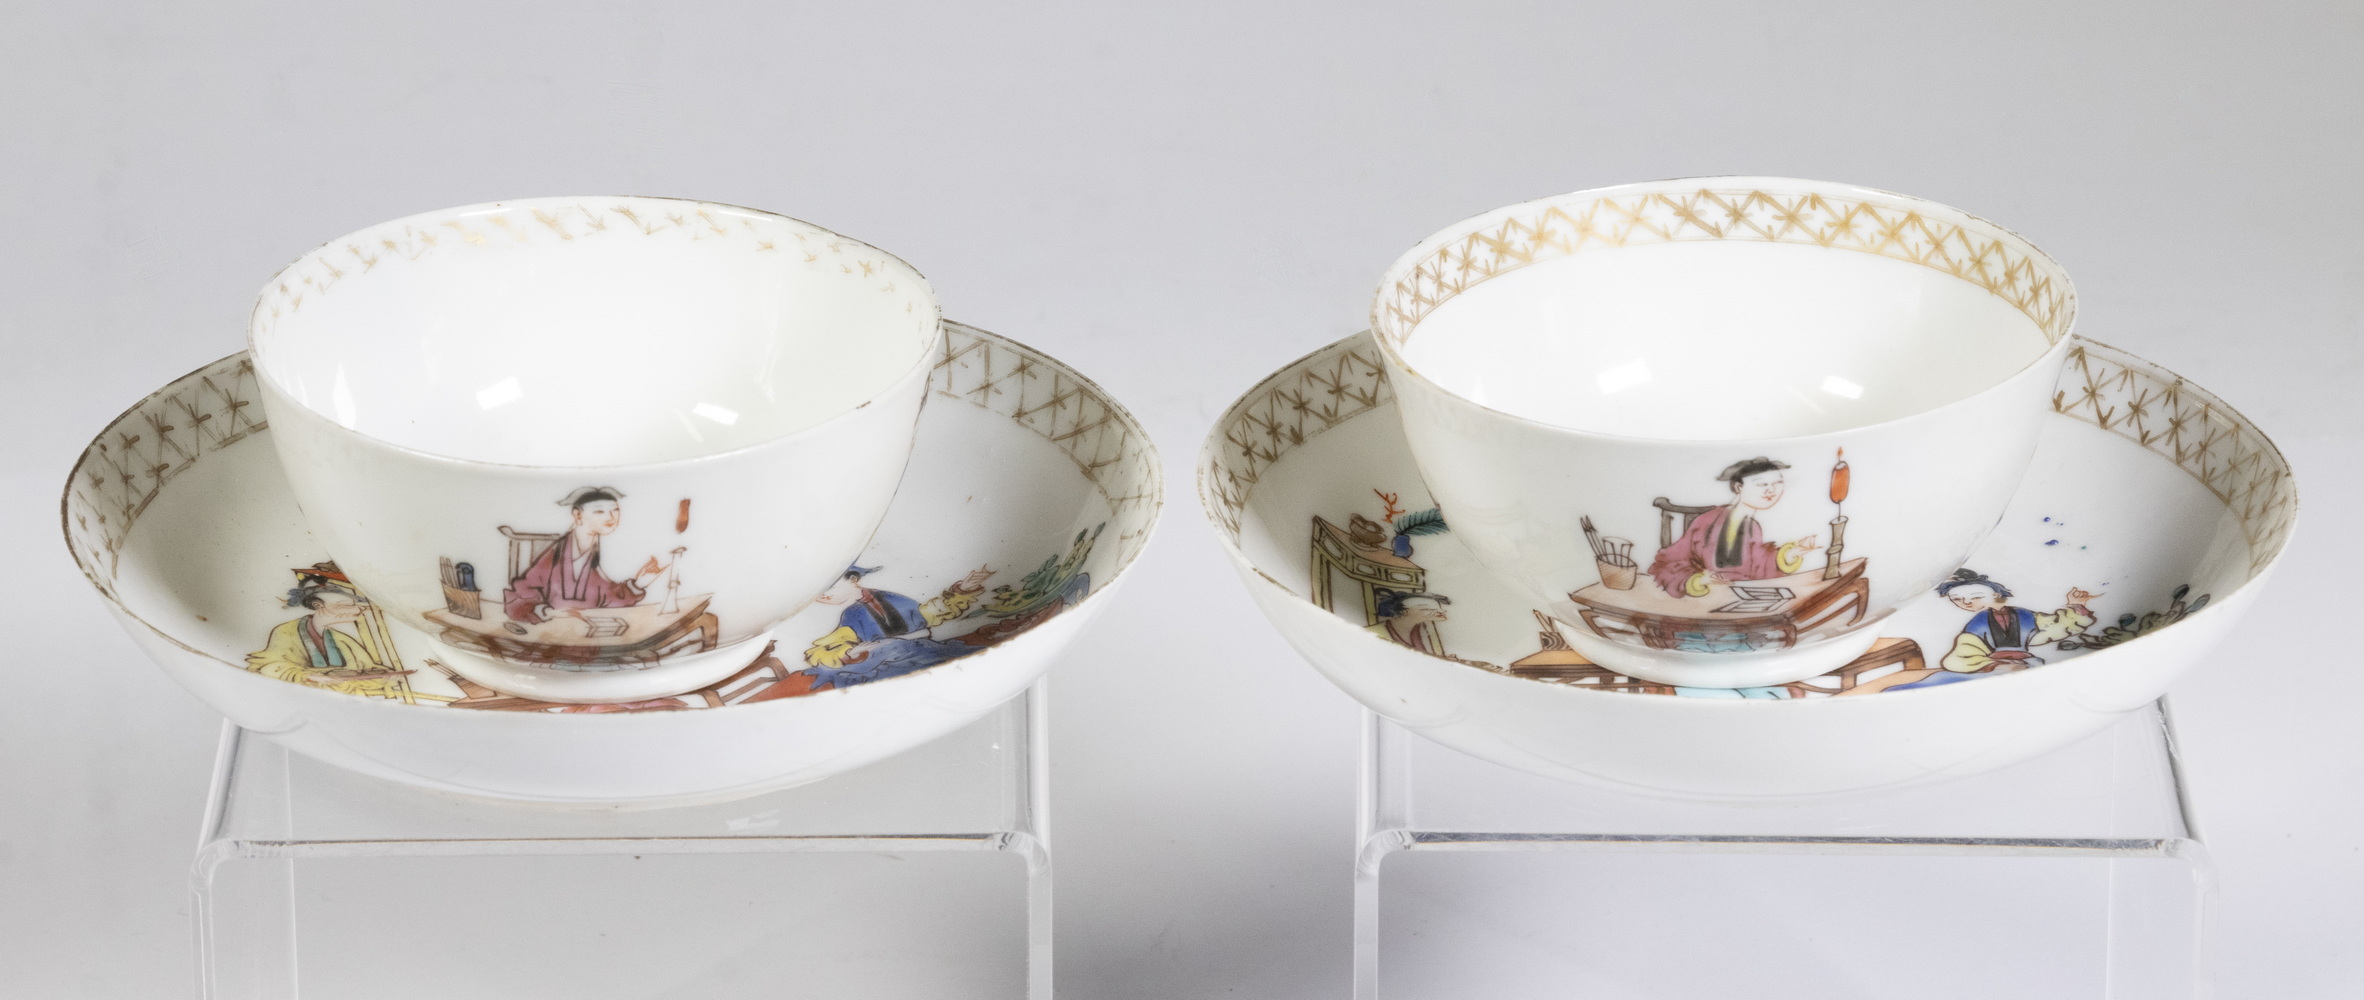 PR CHINESE CUPS AND SAUCERS Pair 2b3de7